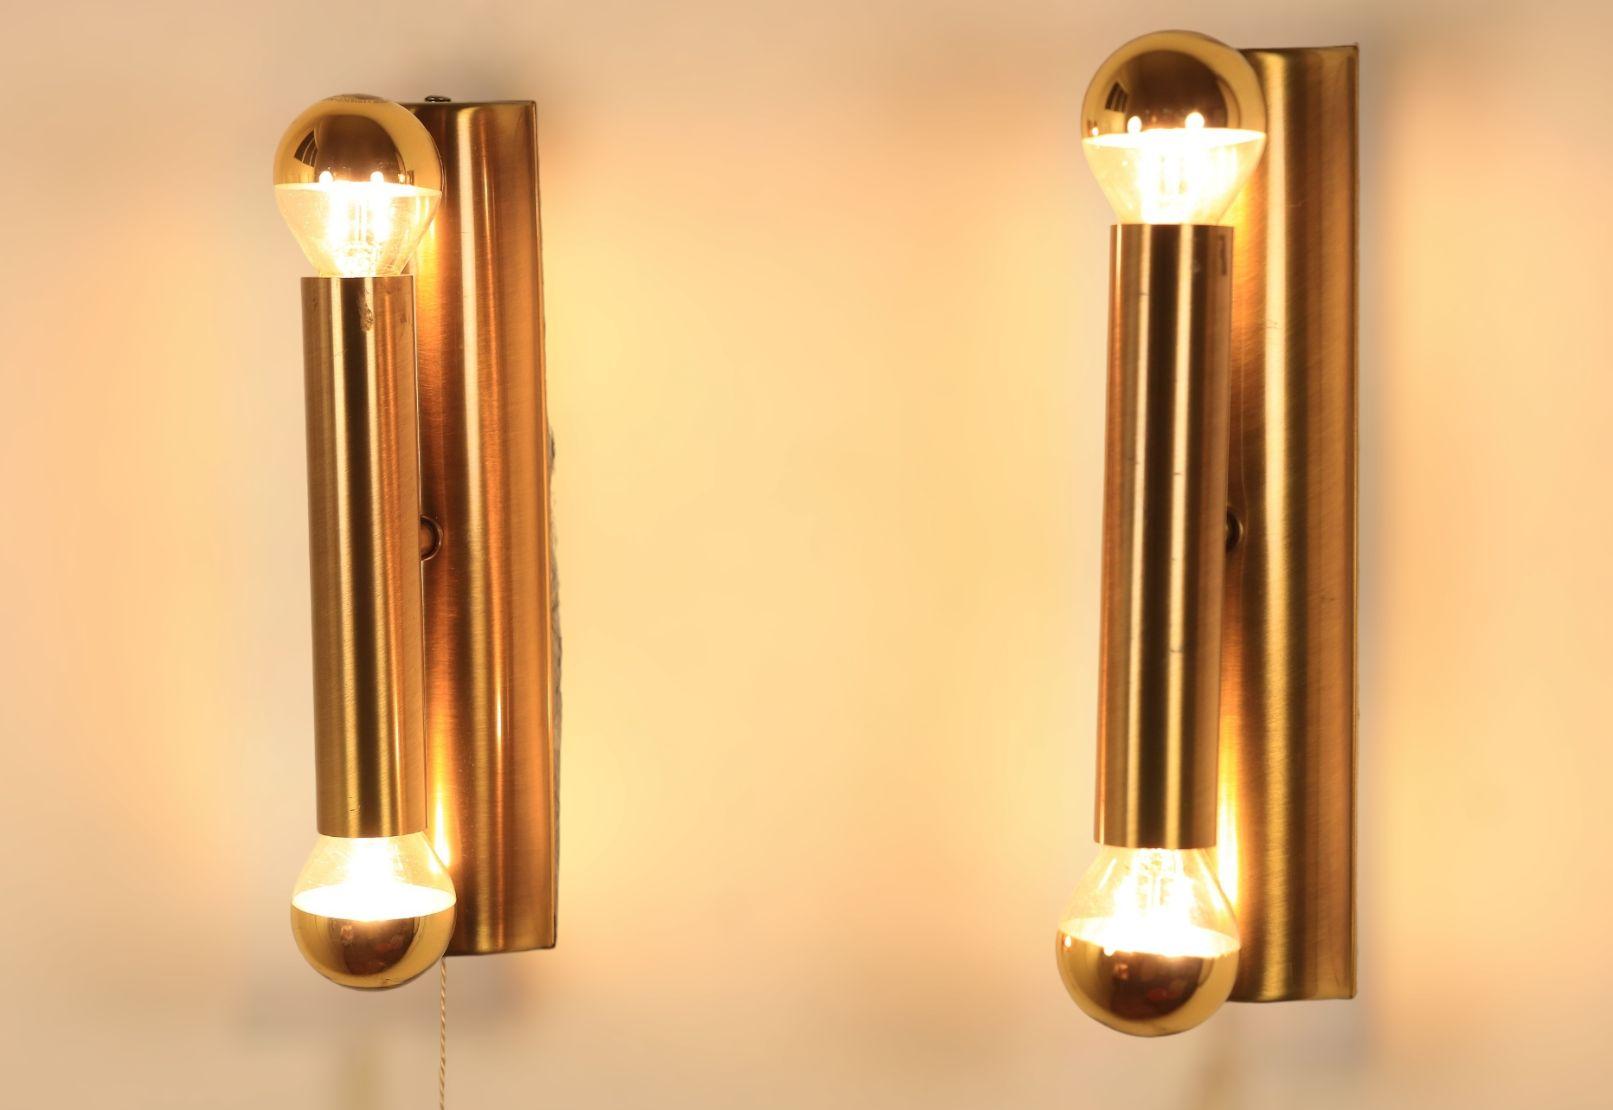 German Set of Minimalistic Brass Wall Lights, 1980s For Sale